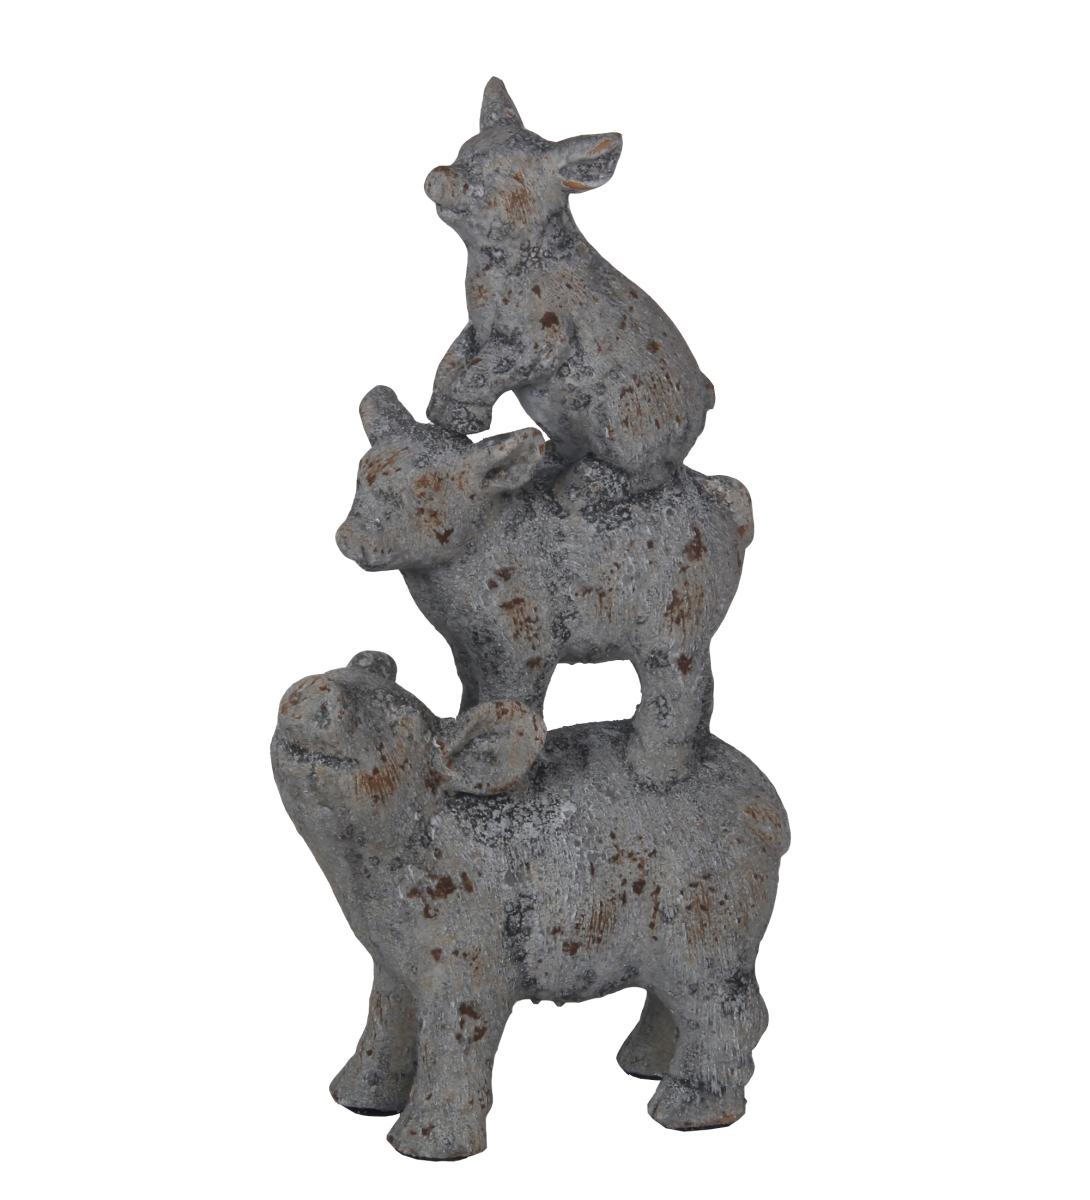 20308 9.5 X 5.5 X 17 In. Traditional Ceramic Pigs Statue, Grey